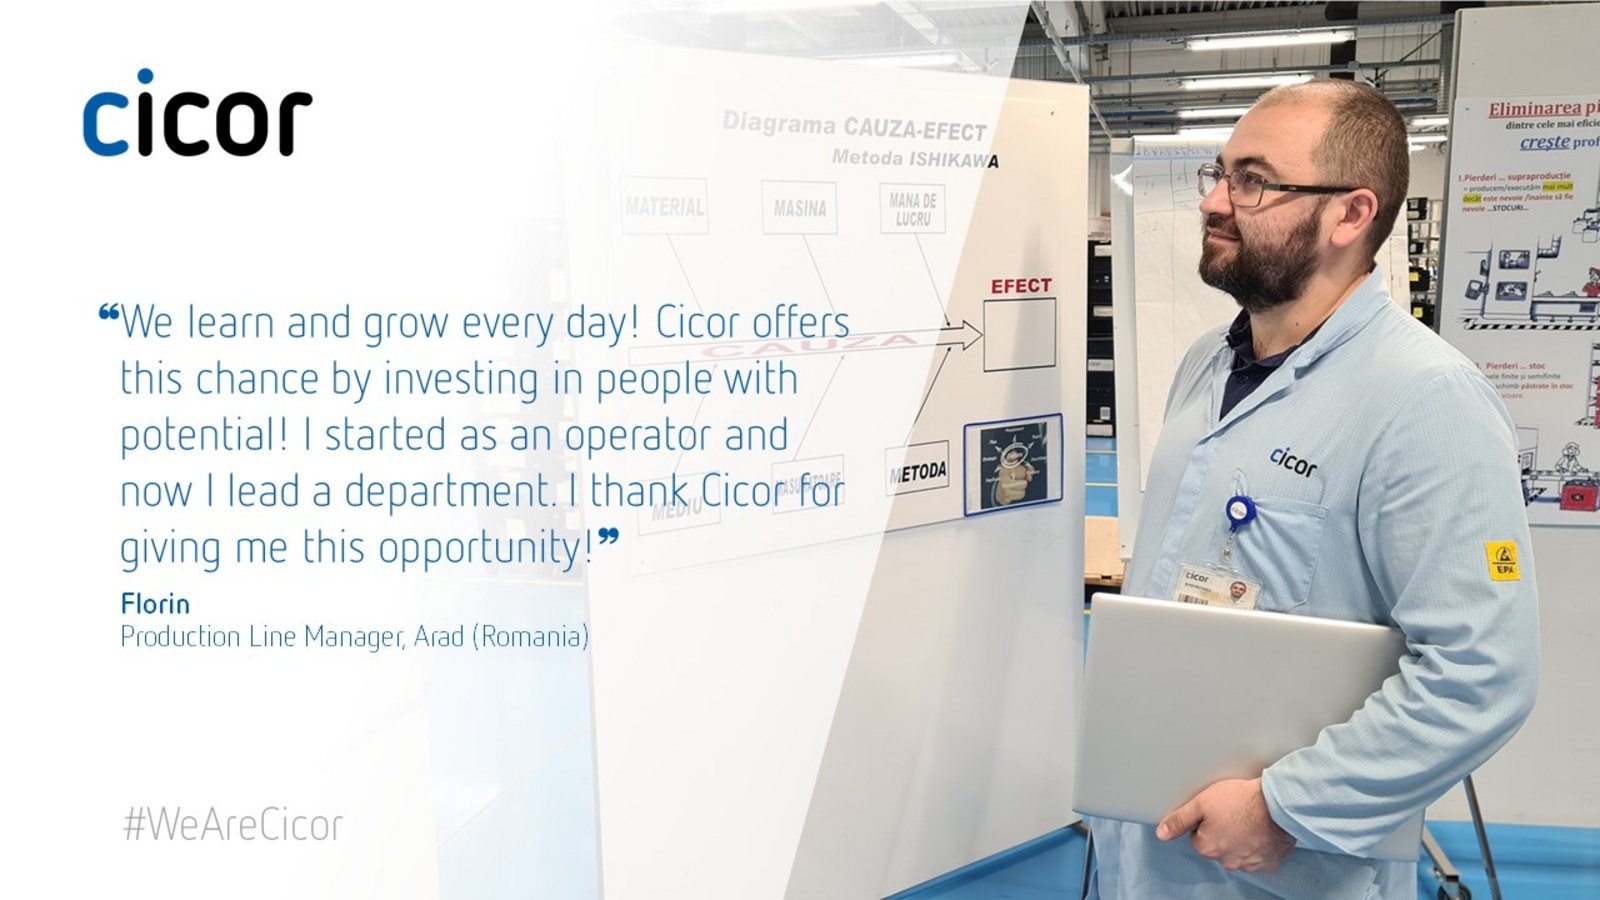 Testimonial of Florin who works at the Cicor site in Arad